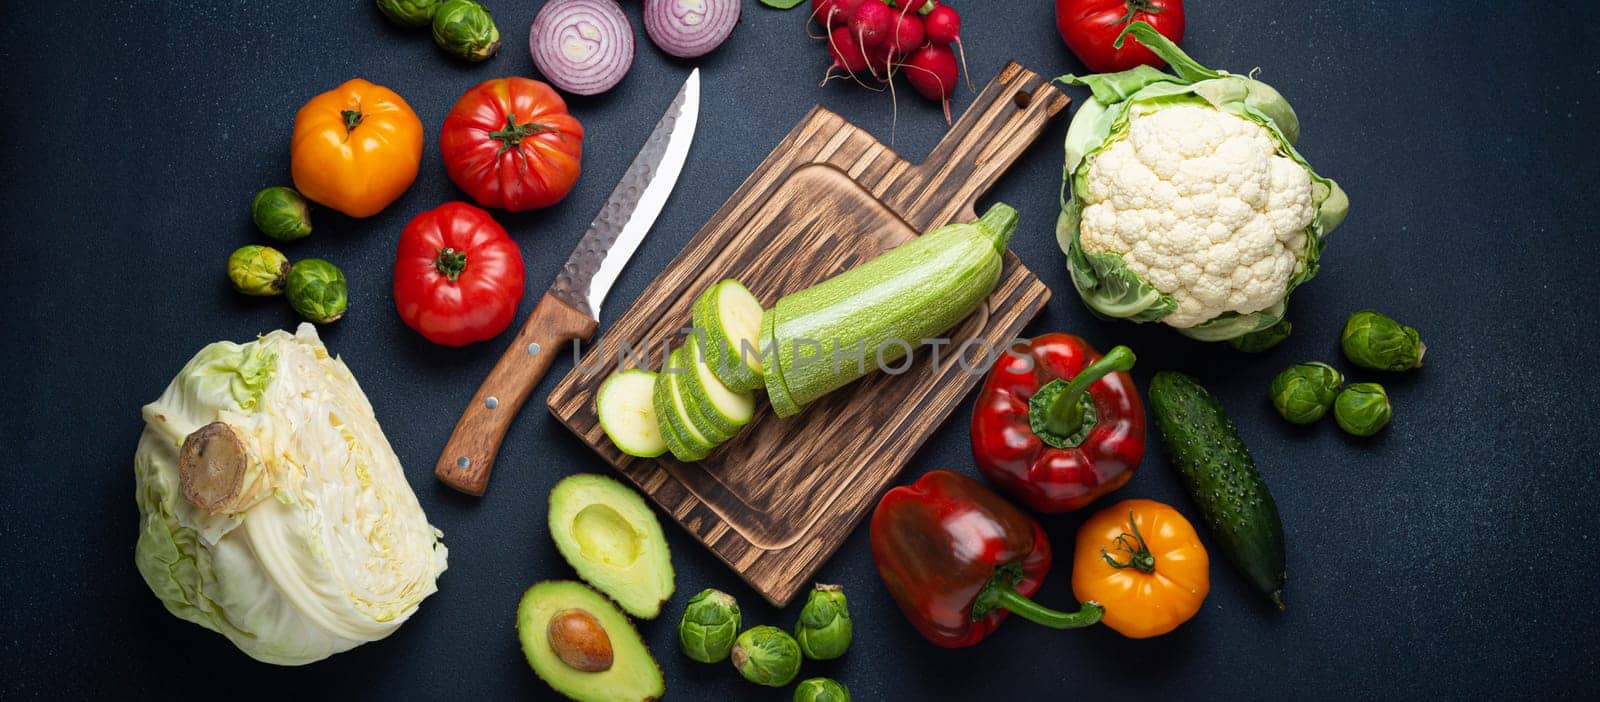 Fresh various vegetables, cut zucchini on wooden cutting board and knife on rustic dark background top view. Cooking vegetarian meal with healthy ingredients, diet food and nutrition concept by its_al_dente